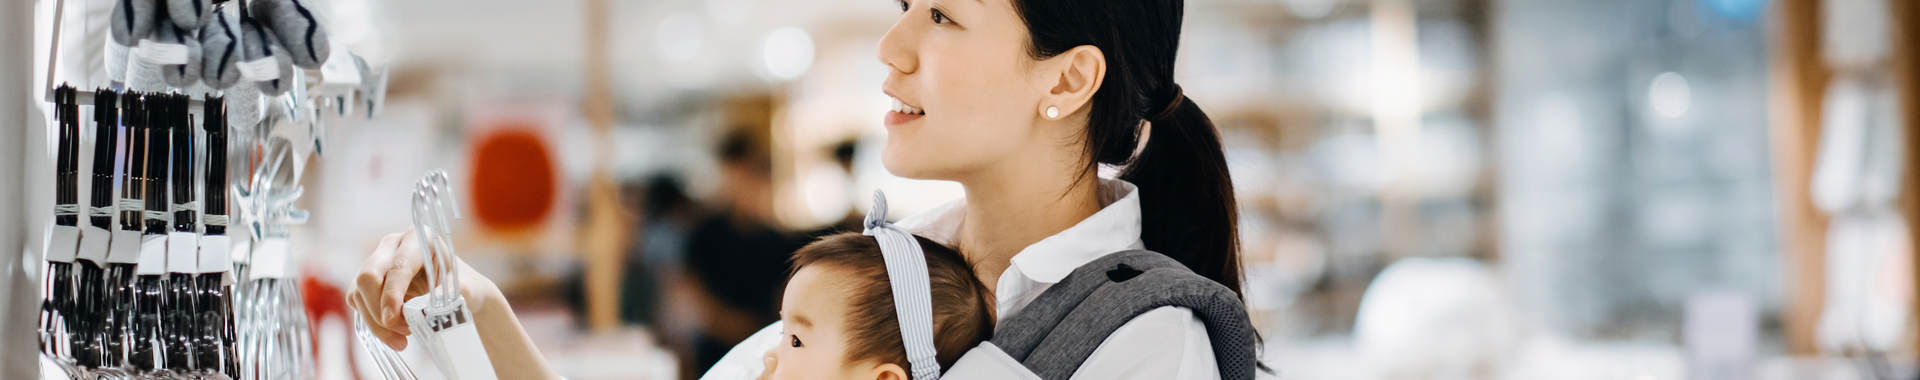 Asian women with baby shopping at department store